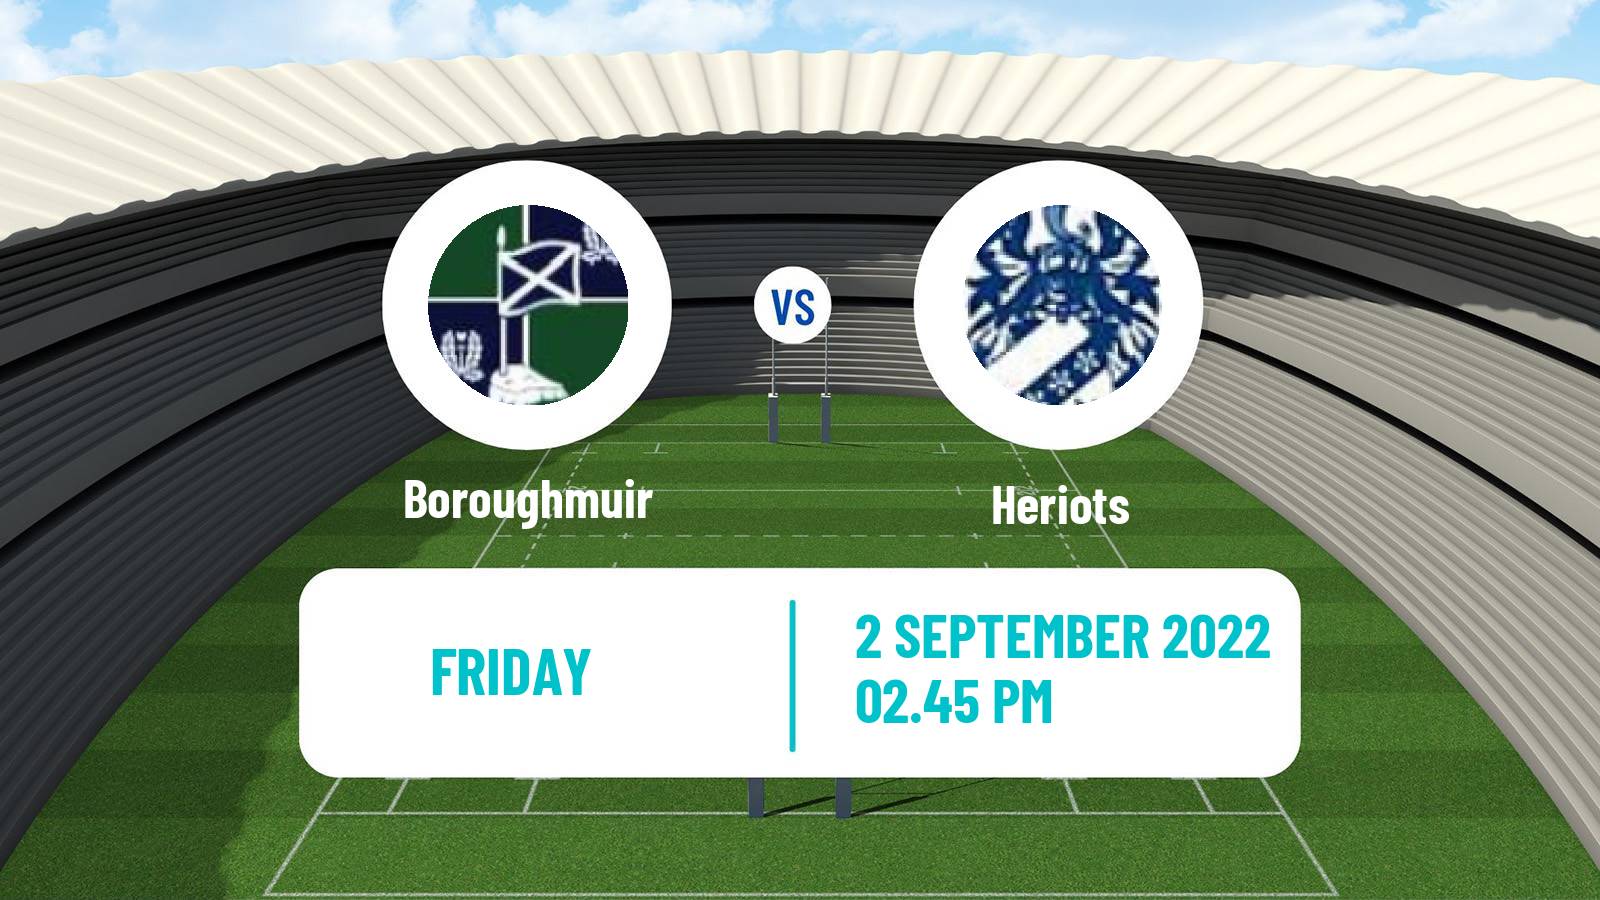 Rugby union Scottish Super 6 Rugby Boroughmuir - Heriots